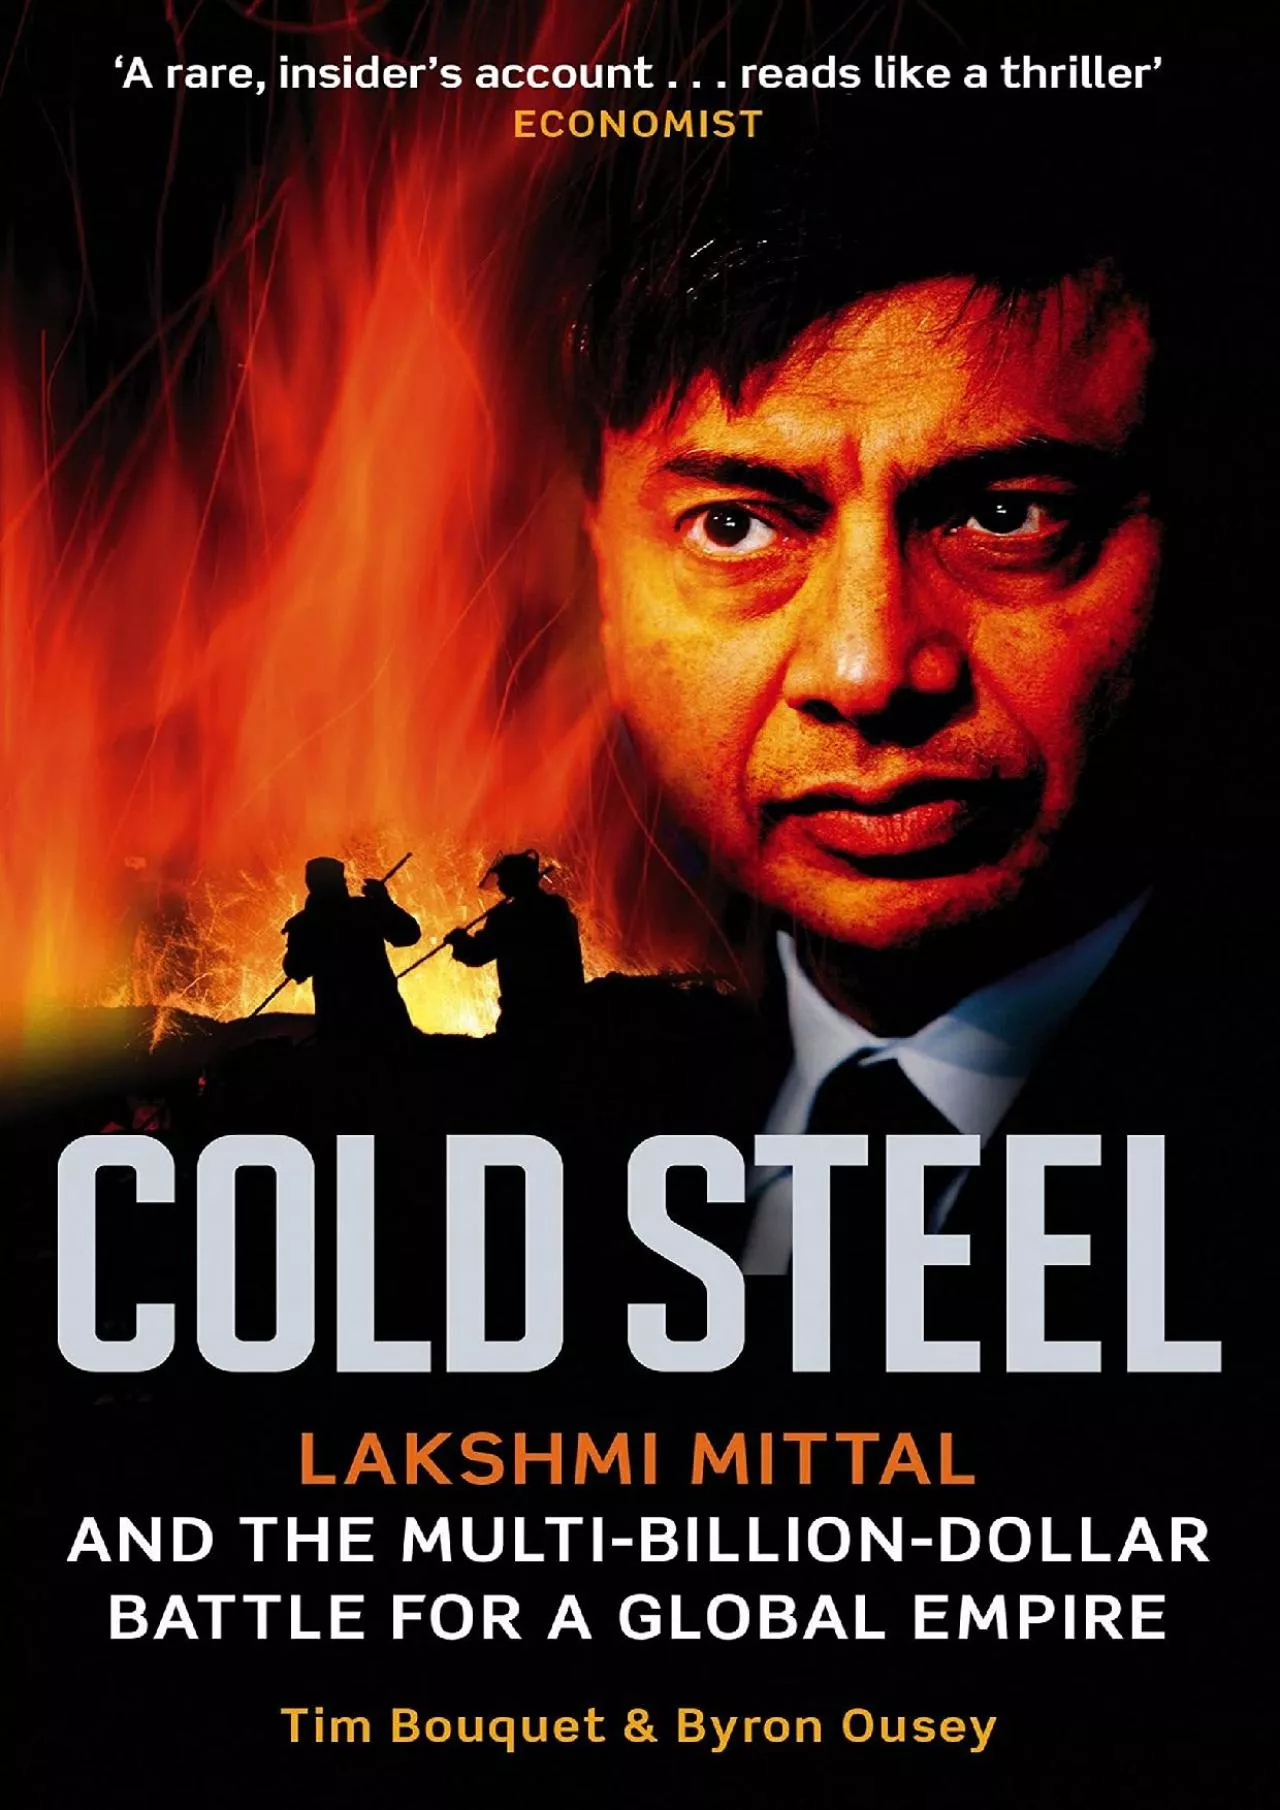 (EBOOK)-Cold Steel: Lakshmi Mittal and the Multi-Billion-Dollar Battle for a Global Empire